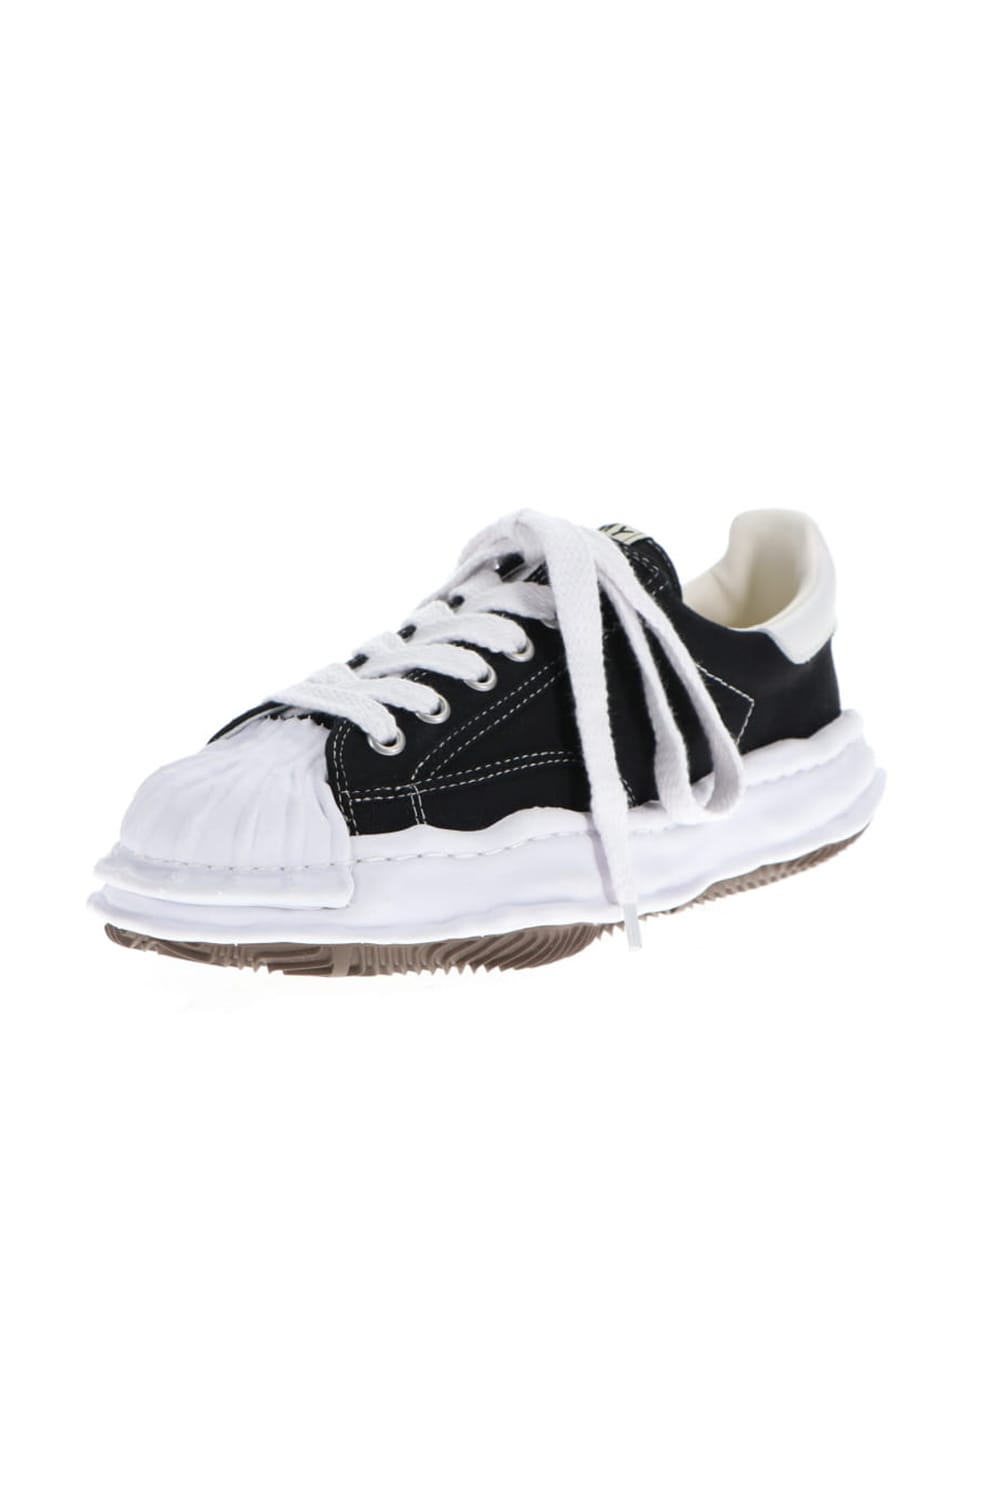 -BLAKEY Low- Original STC sole canvas Low-cut sneakers Black Delivery November